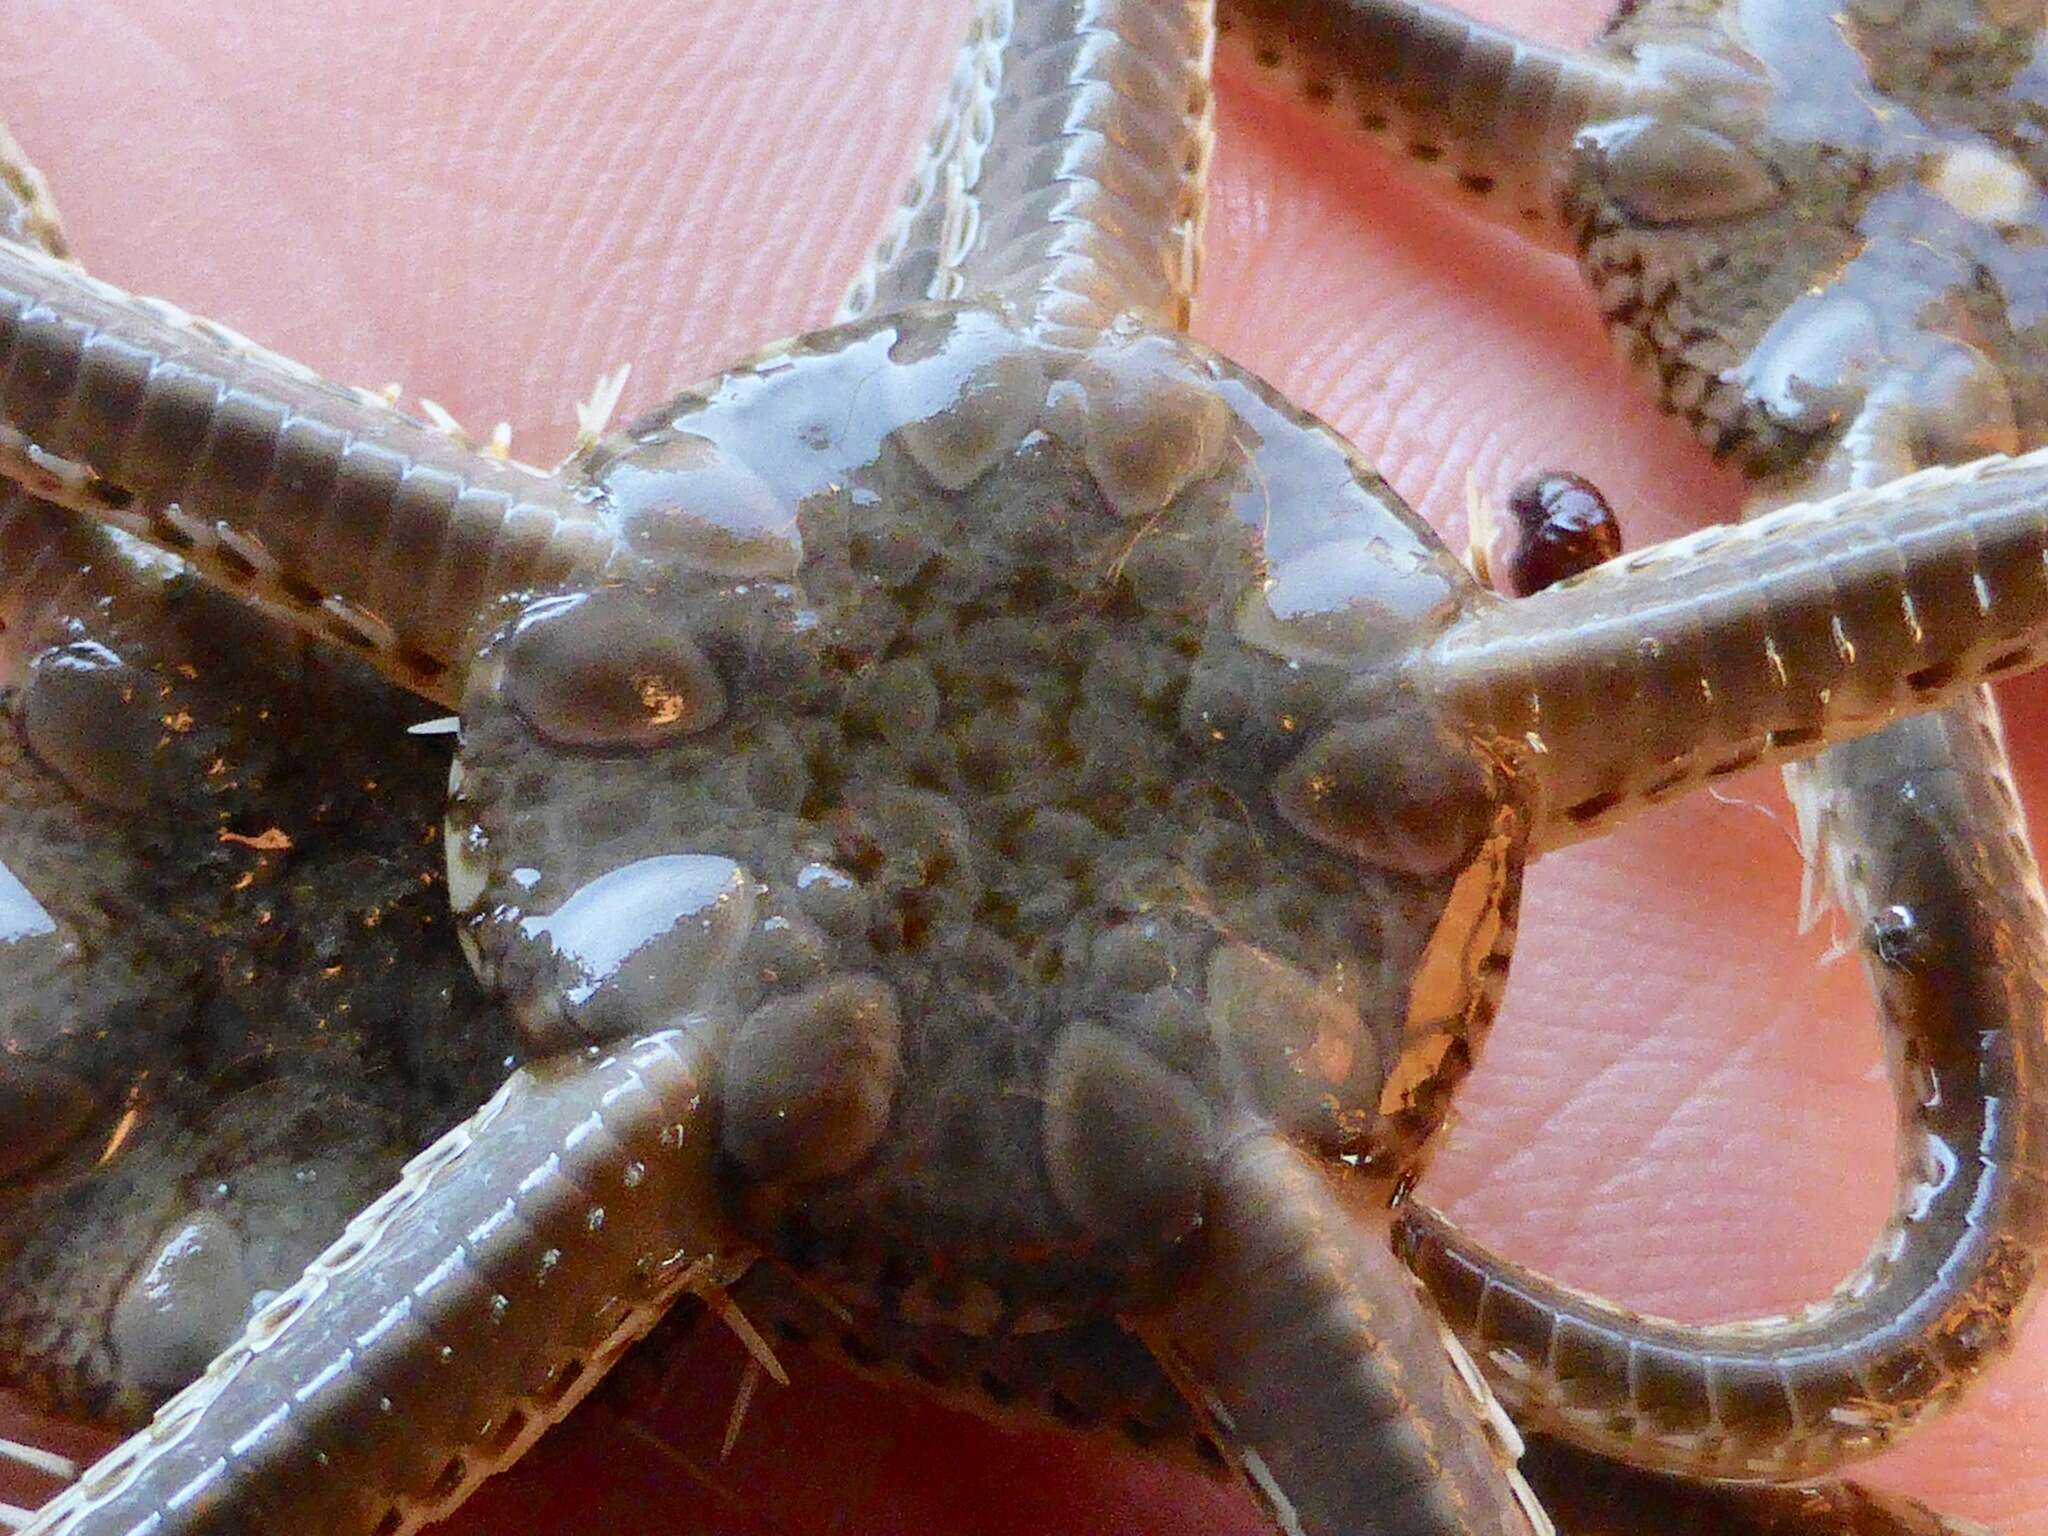 Image of Notched brittle star